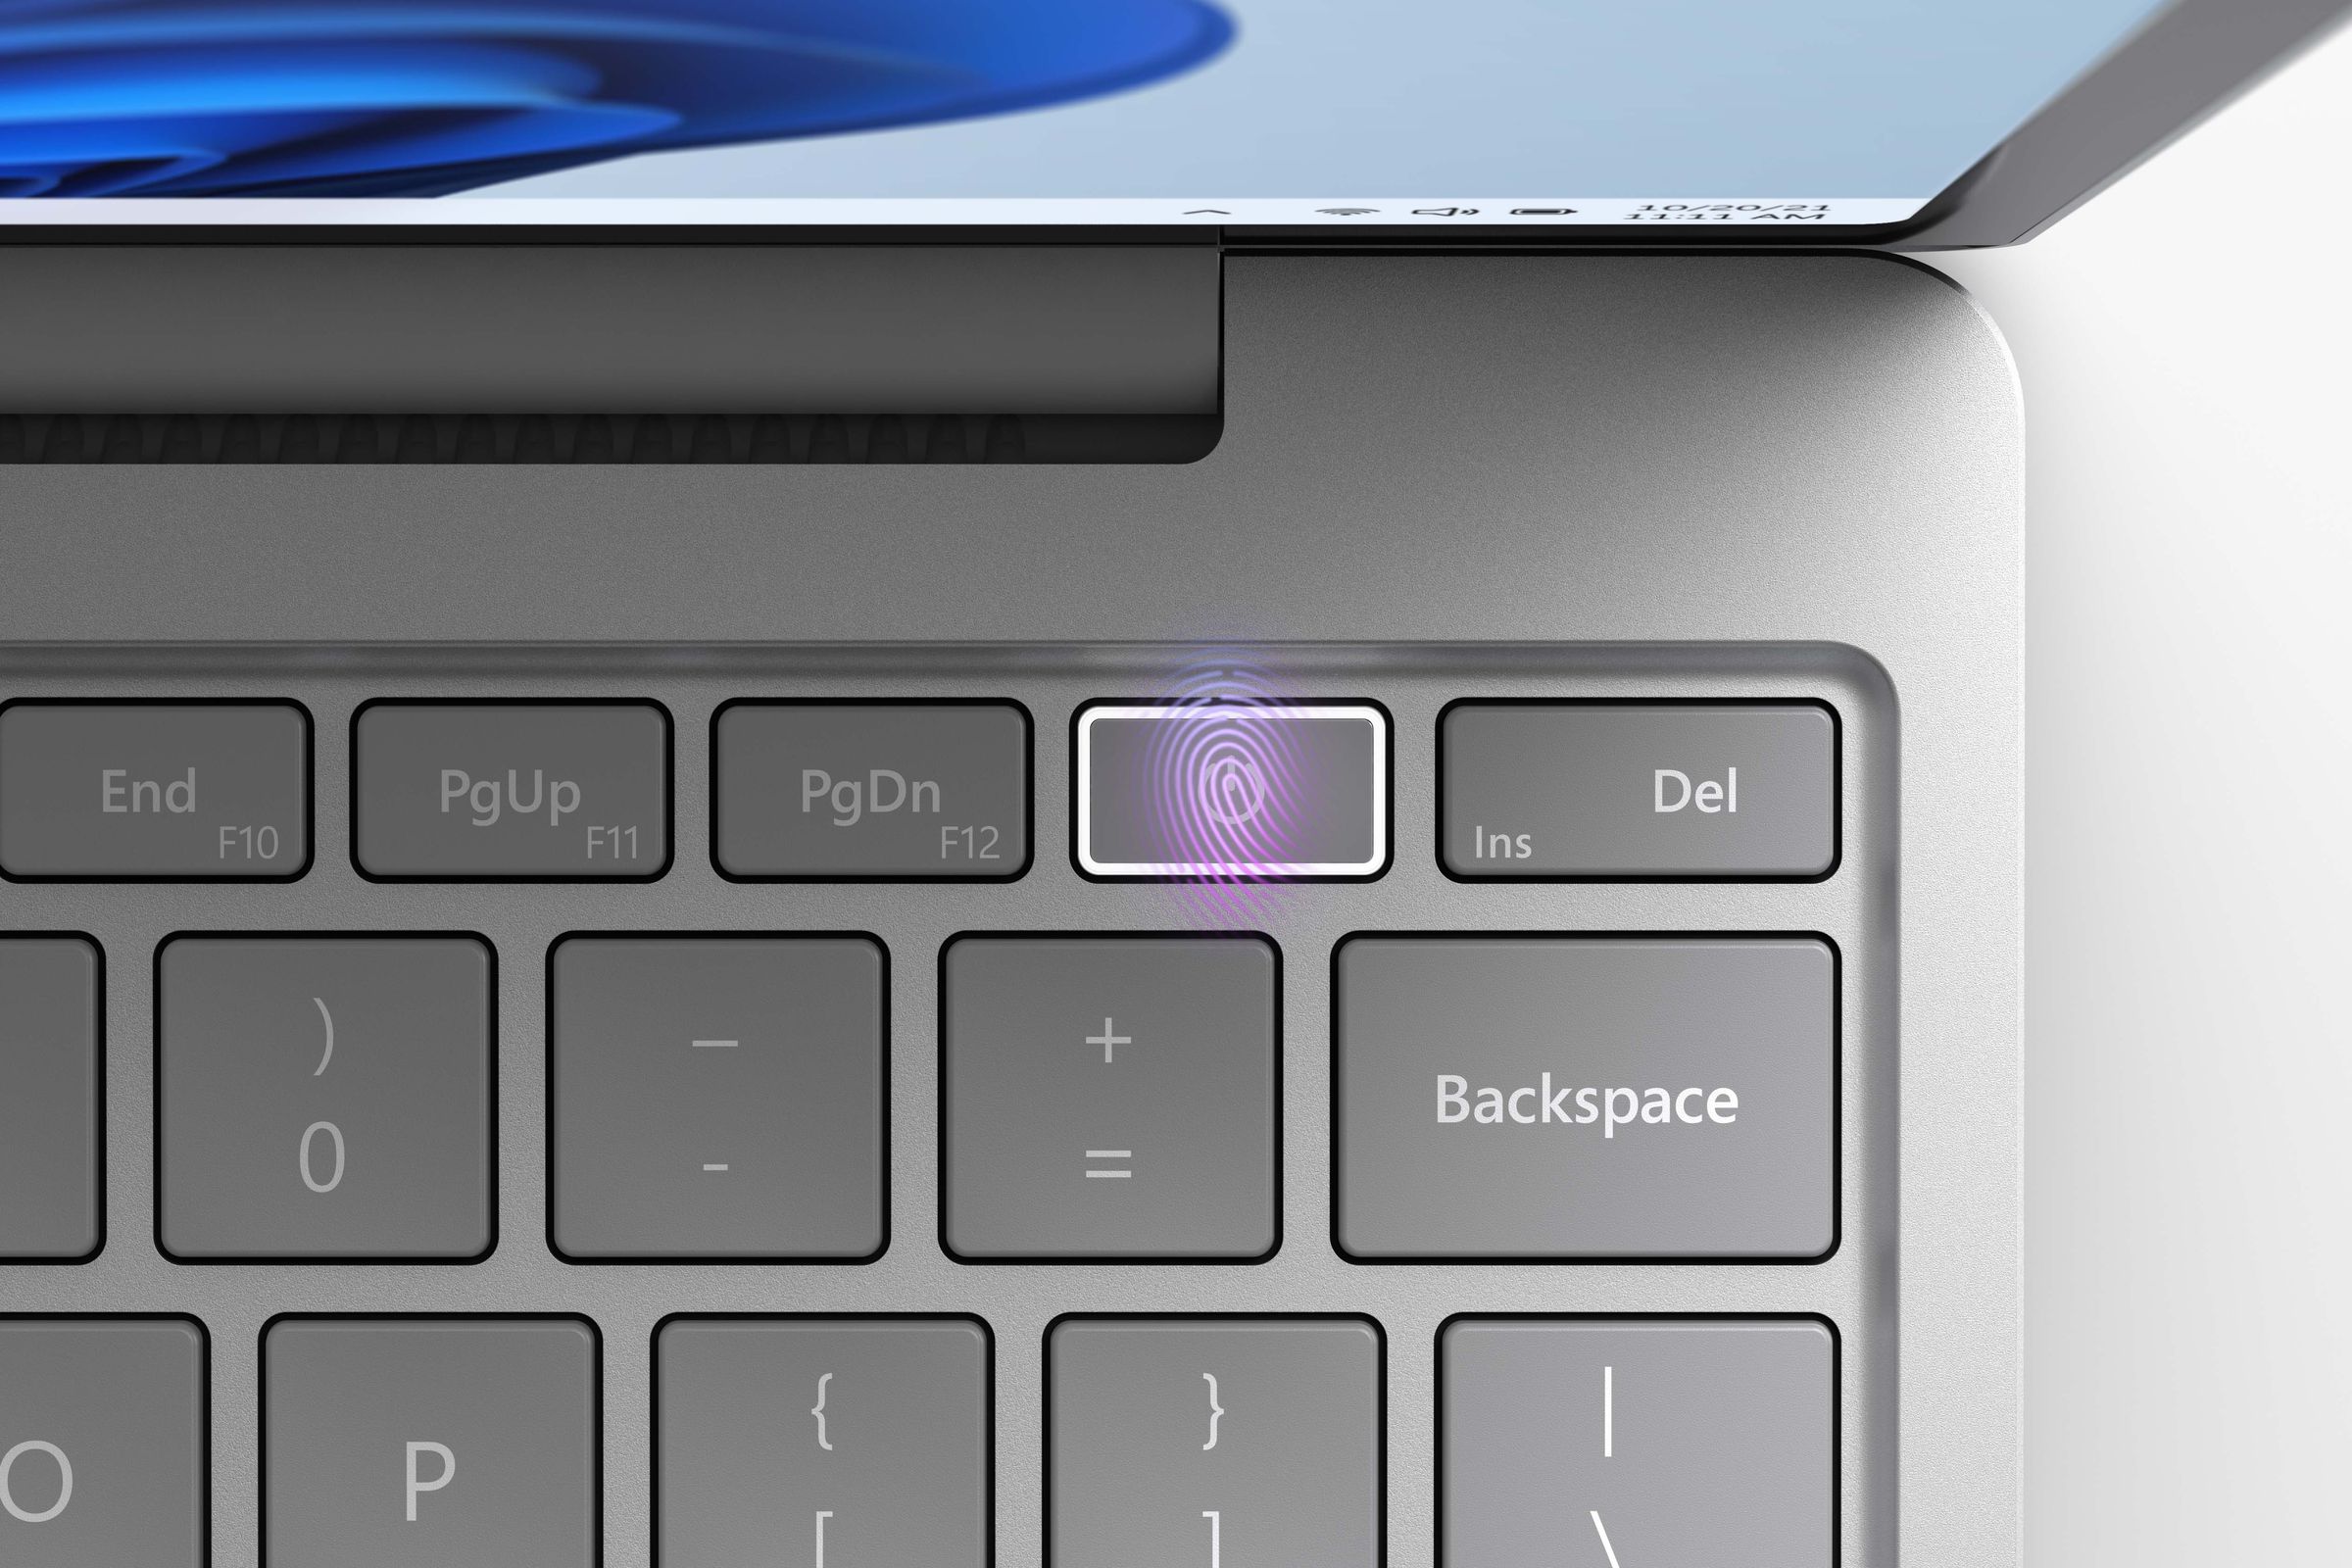 The laptop comes with a fingerprint sensor in the power button of select models.﻿